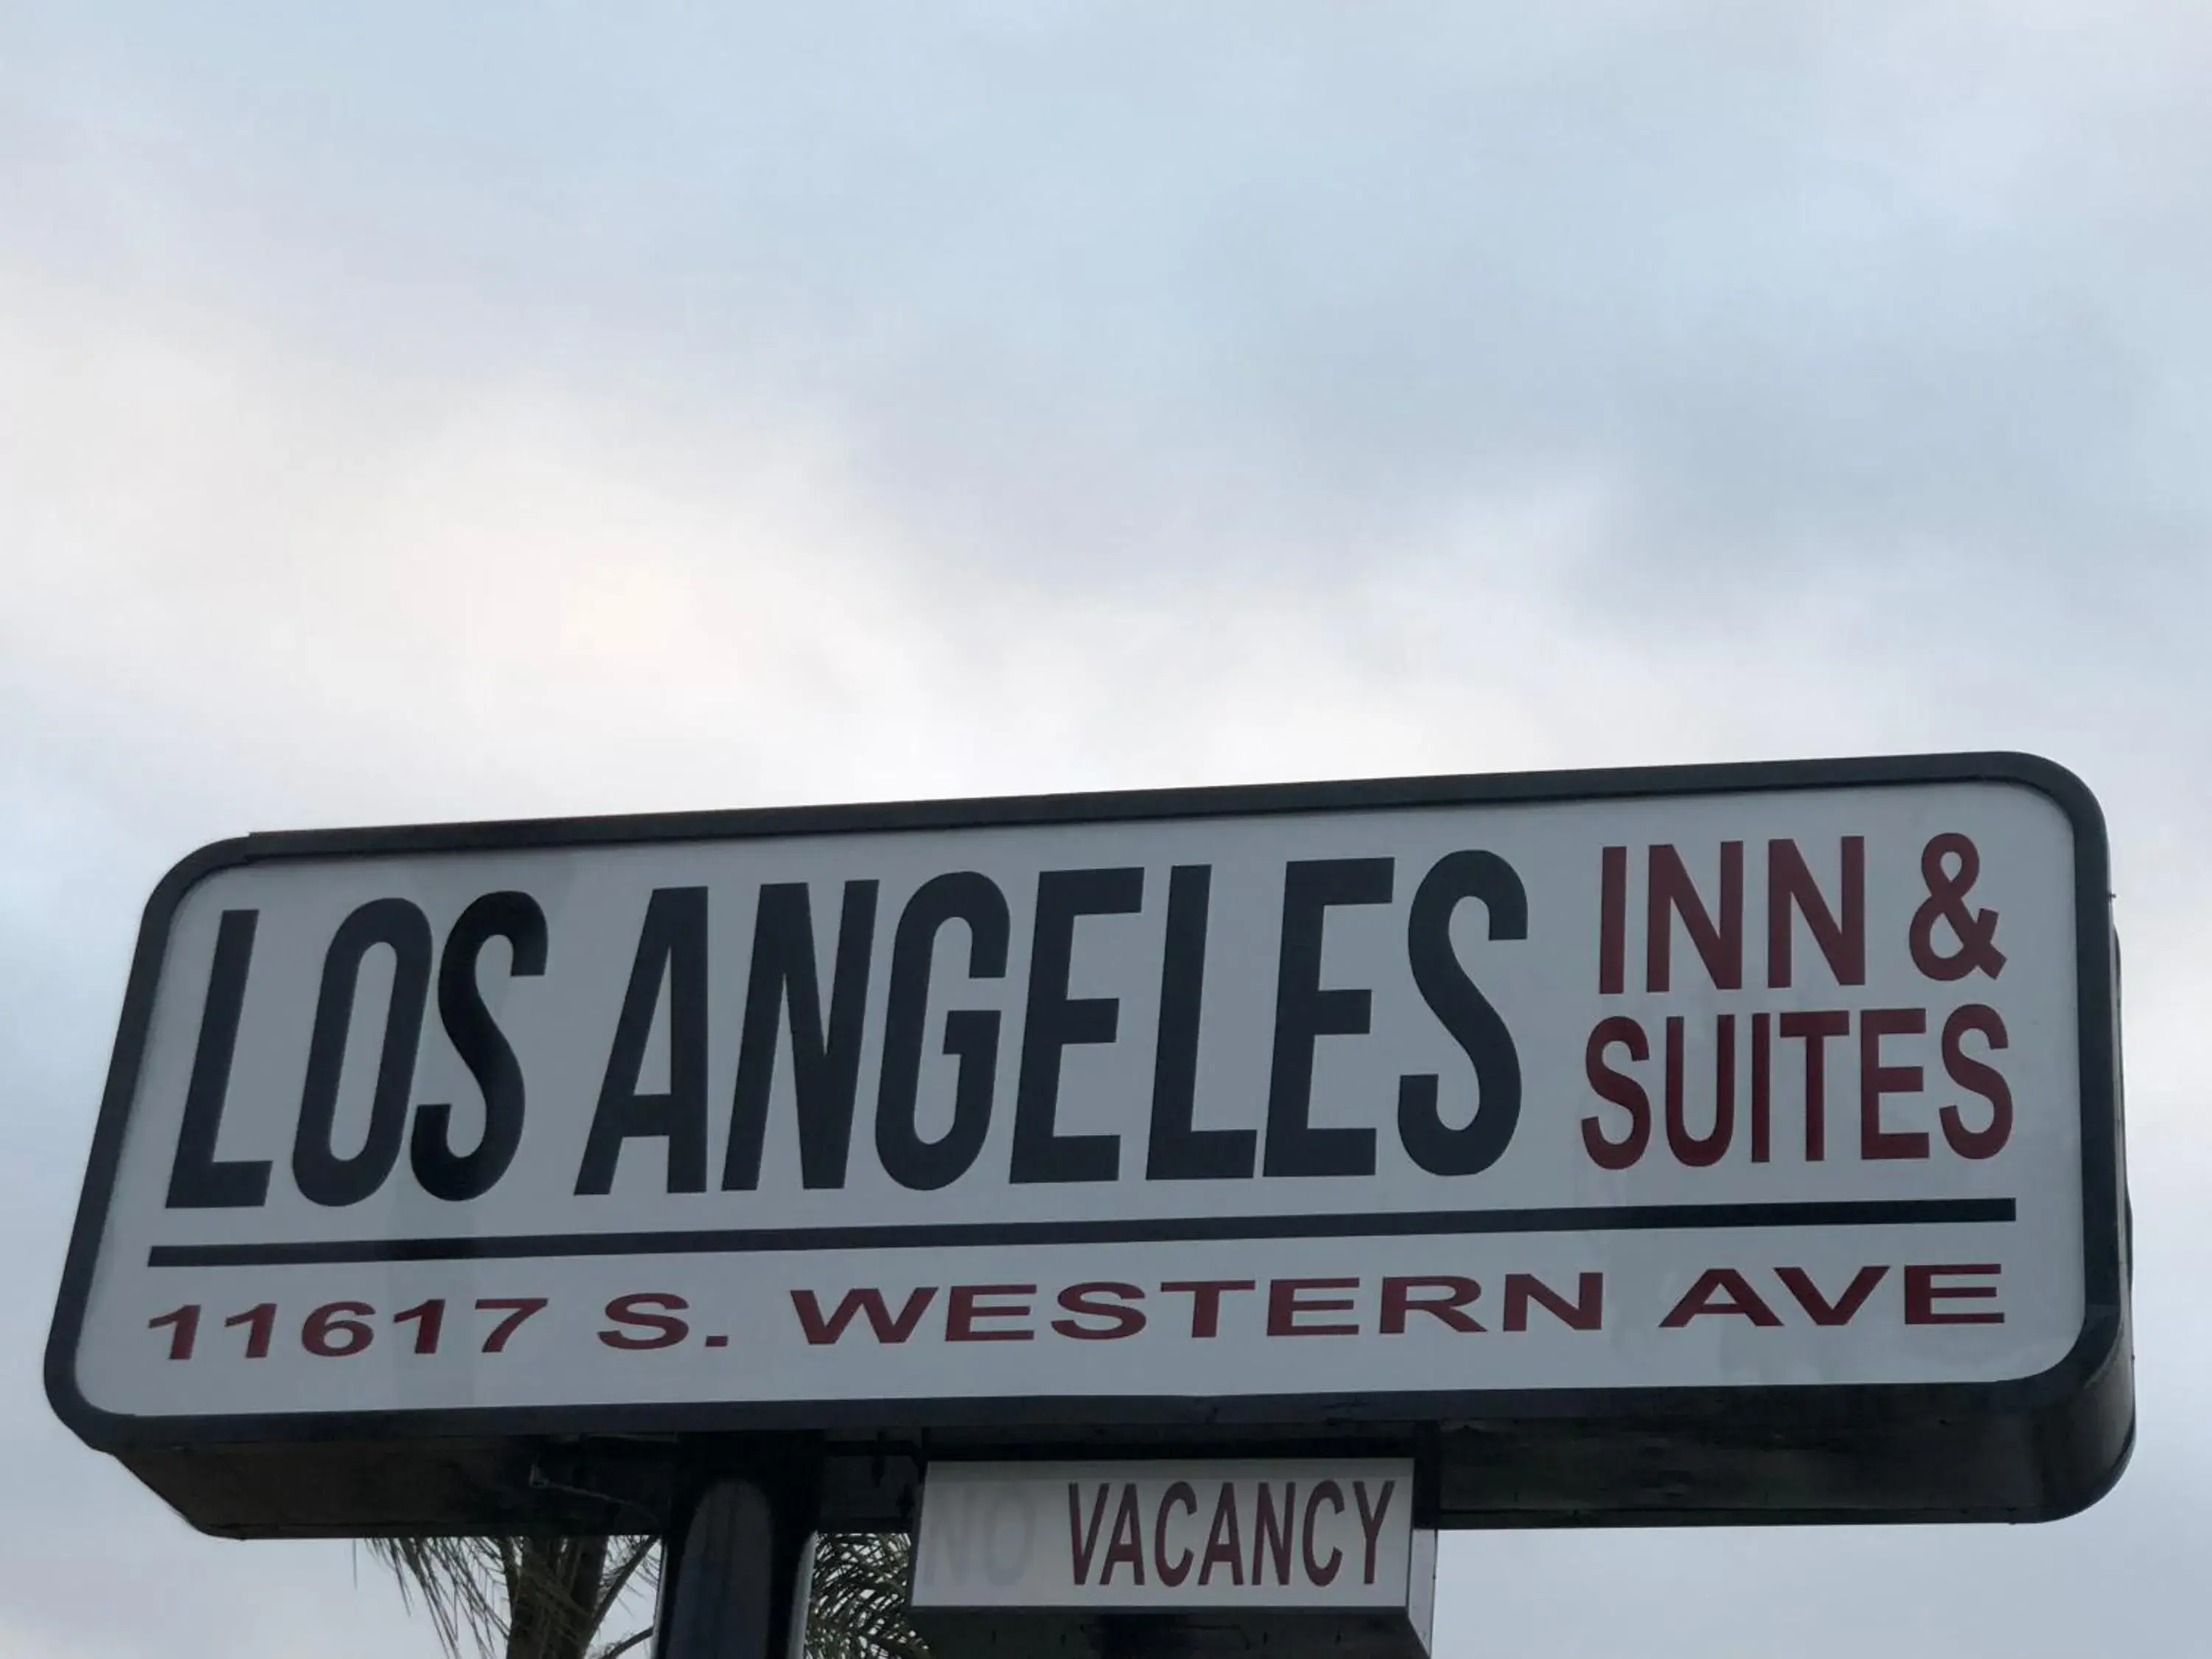 Property Logo/Sign in Los Angeles Inn & Suites - LAX